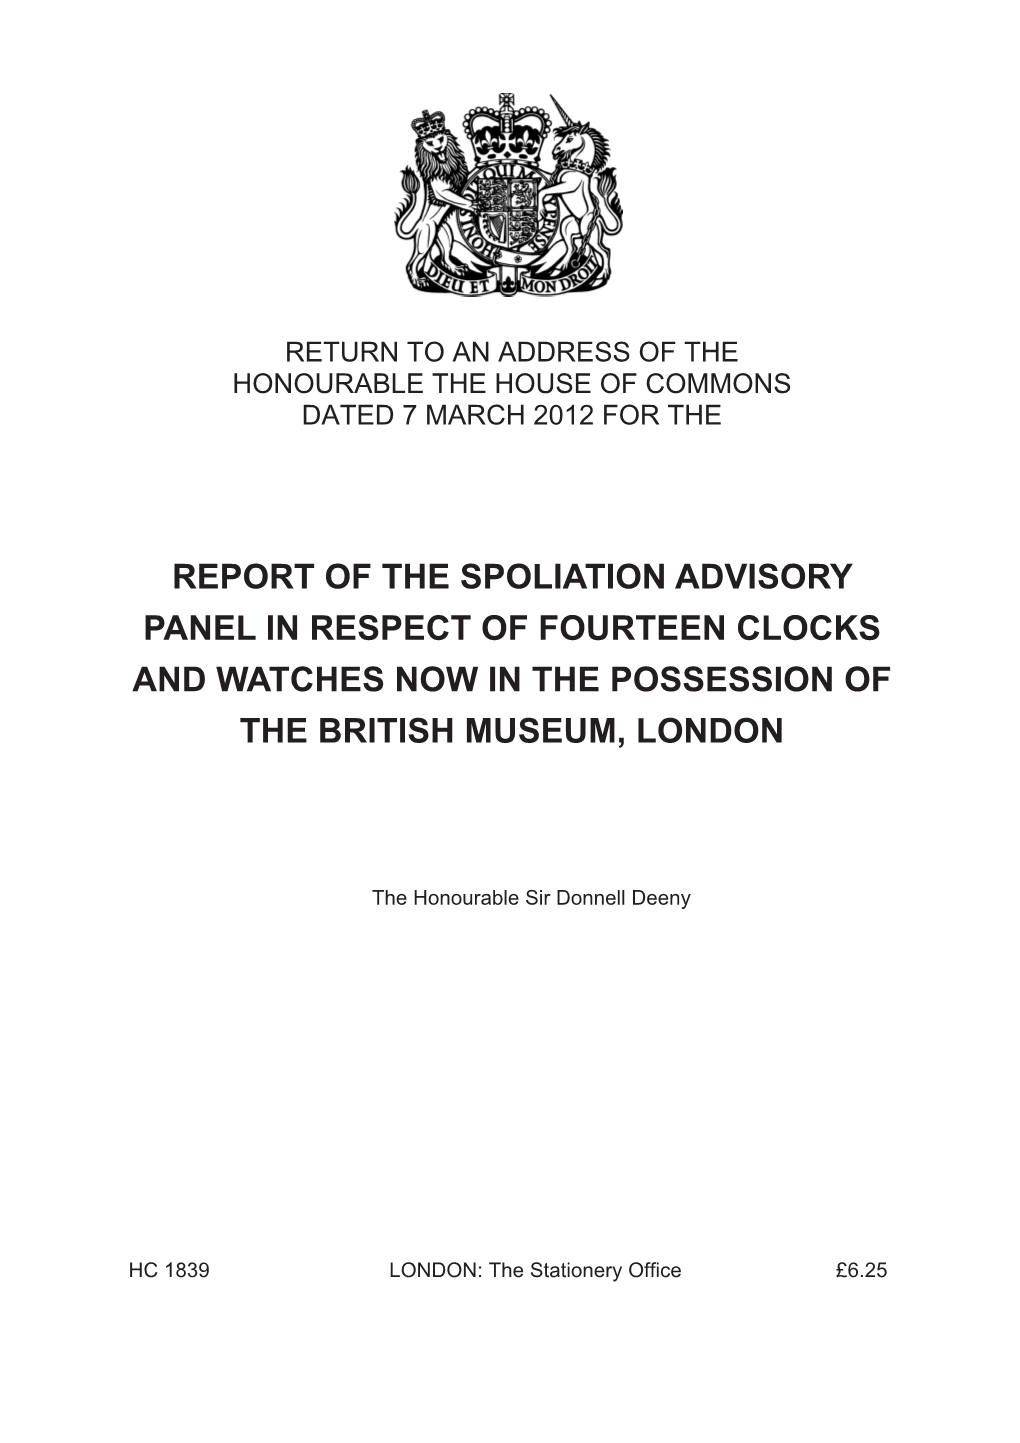 Report of the Spoliation Advisory Panel in Respect of Fourteen Clocks and Watches Now in the Possession of the British Museum, London